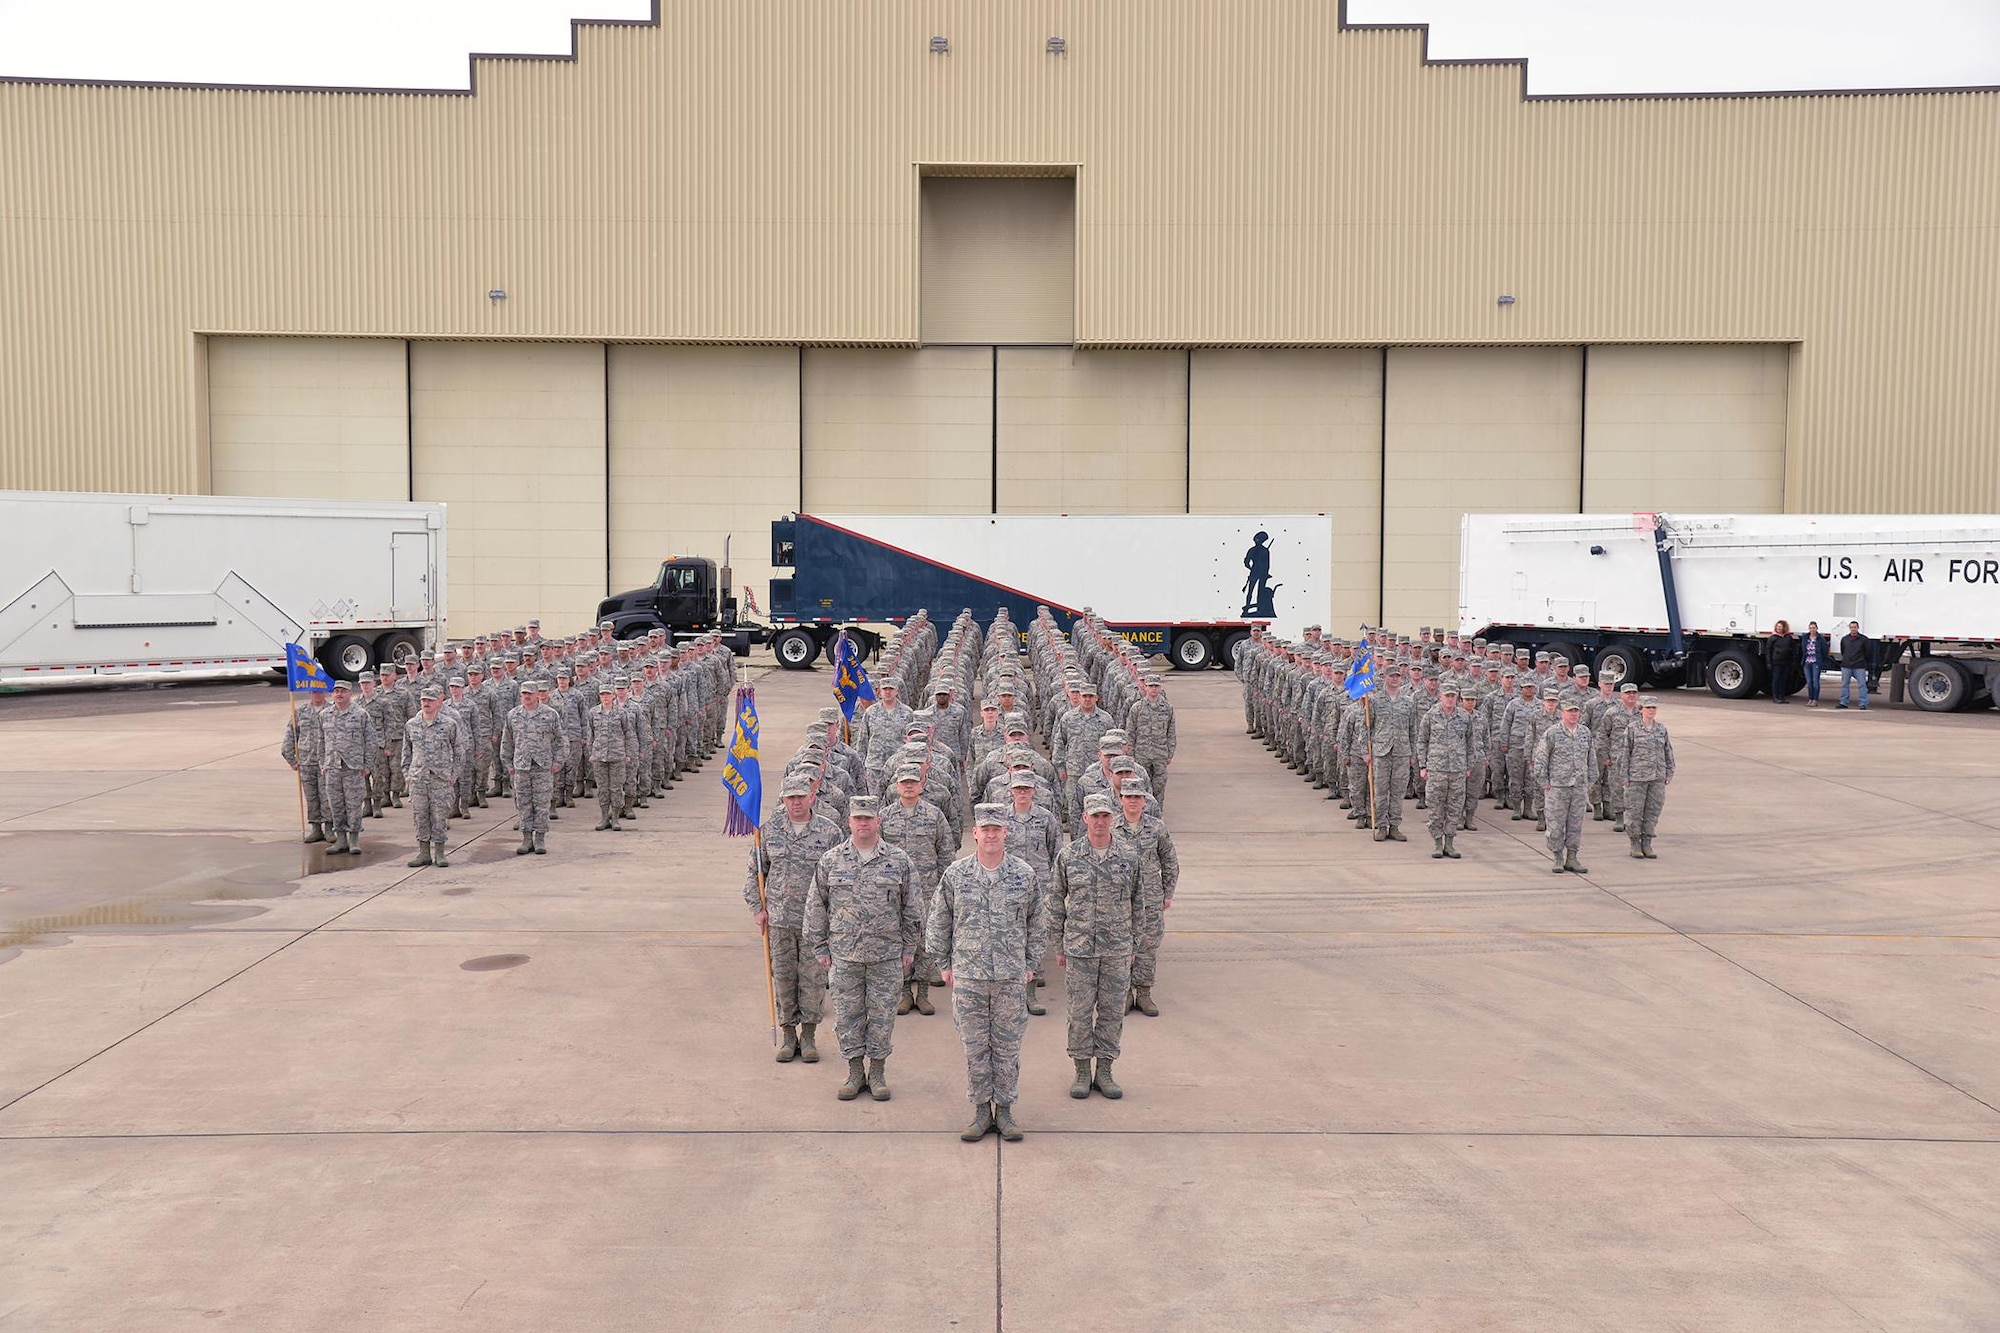 Airmen from the 341st Maintenance Group stand in formation for a group photo March 3, 2017, at Malmstrom Air Force Base, Mont. The 341st MXG recently won the 2016 Air Force Maintenance Effectiveness Award. (U.S. Air Force photo/Airman First Class Daniel Brosam)